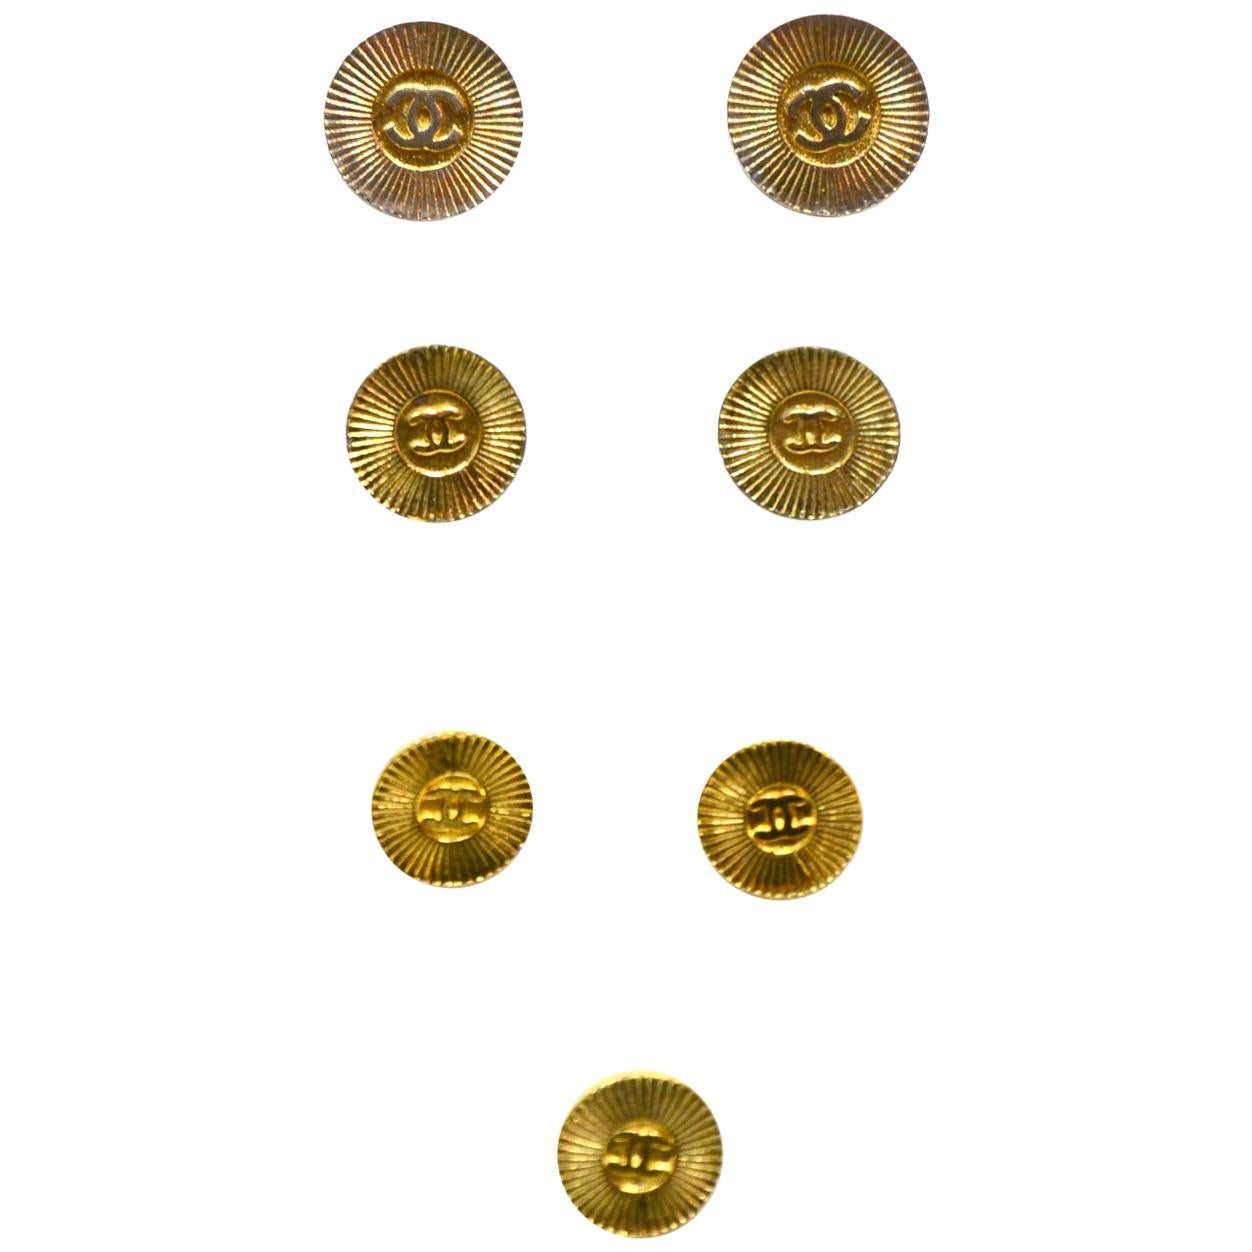 Chanel Goldtone CC Shank Buttons (Set of 7- 3 Small, 2 Medium, 2 Large)